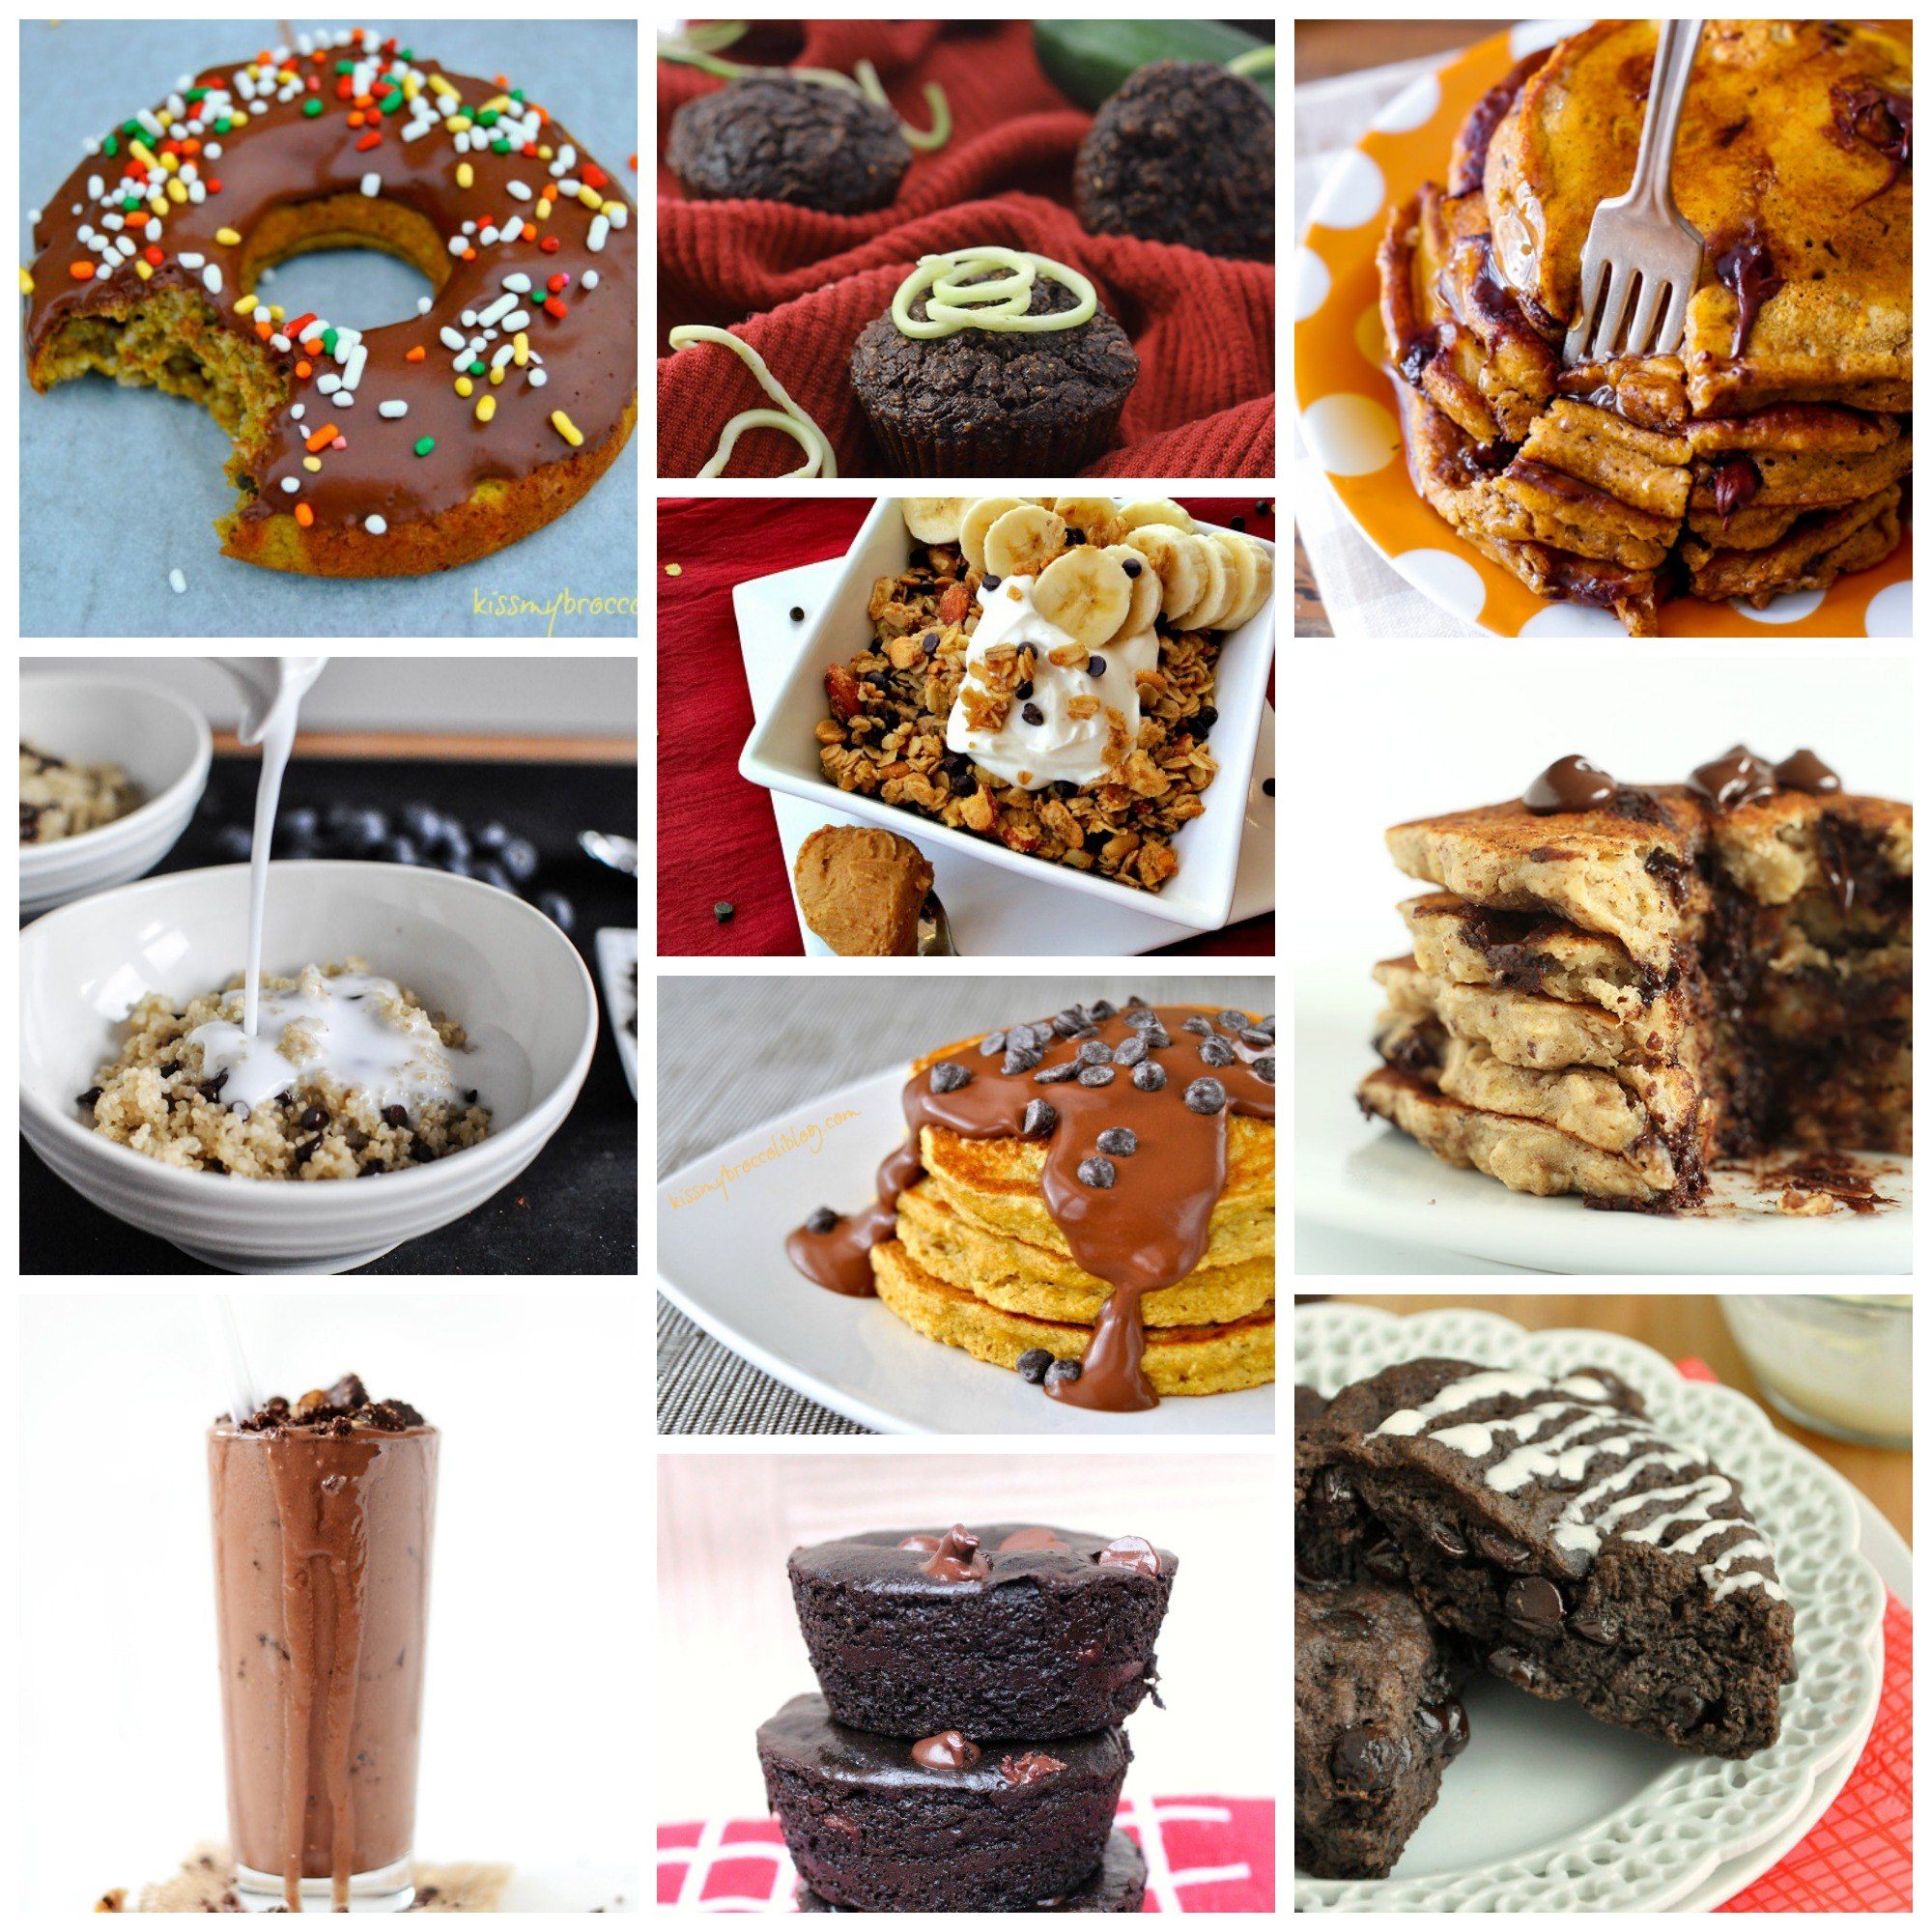 10 Healthy Chocolate Recipes for Breakfast, Yes for Breakfast!